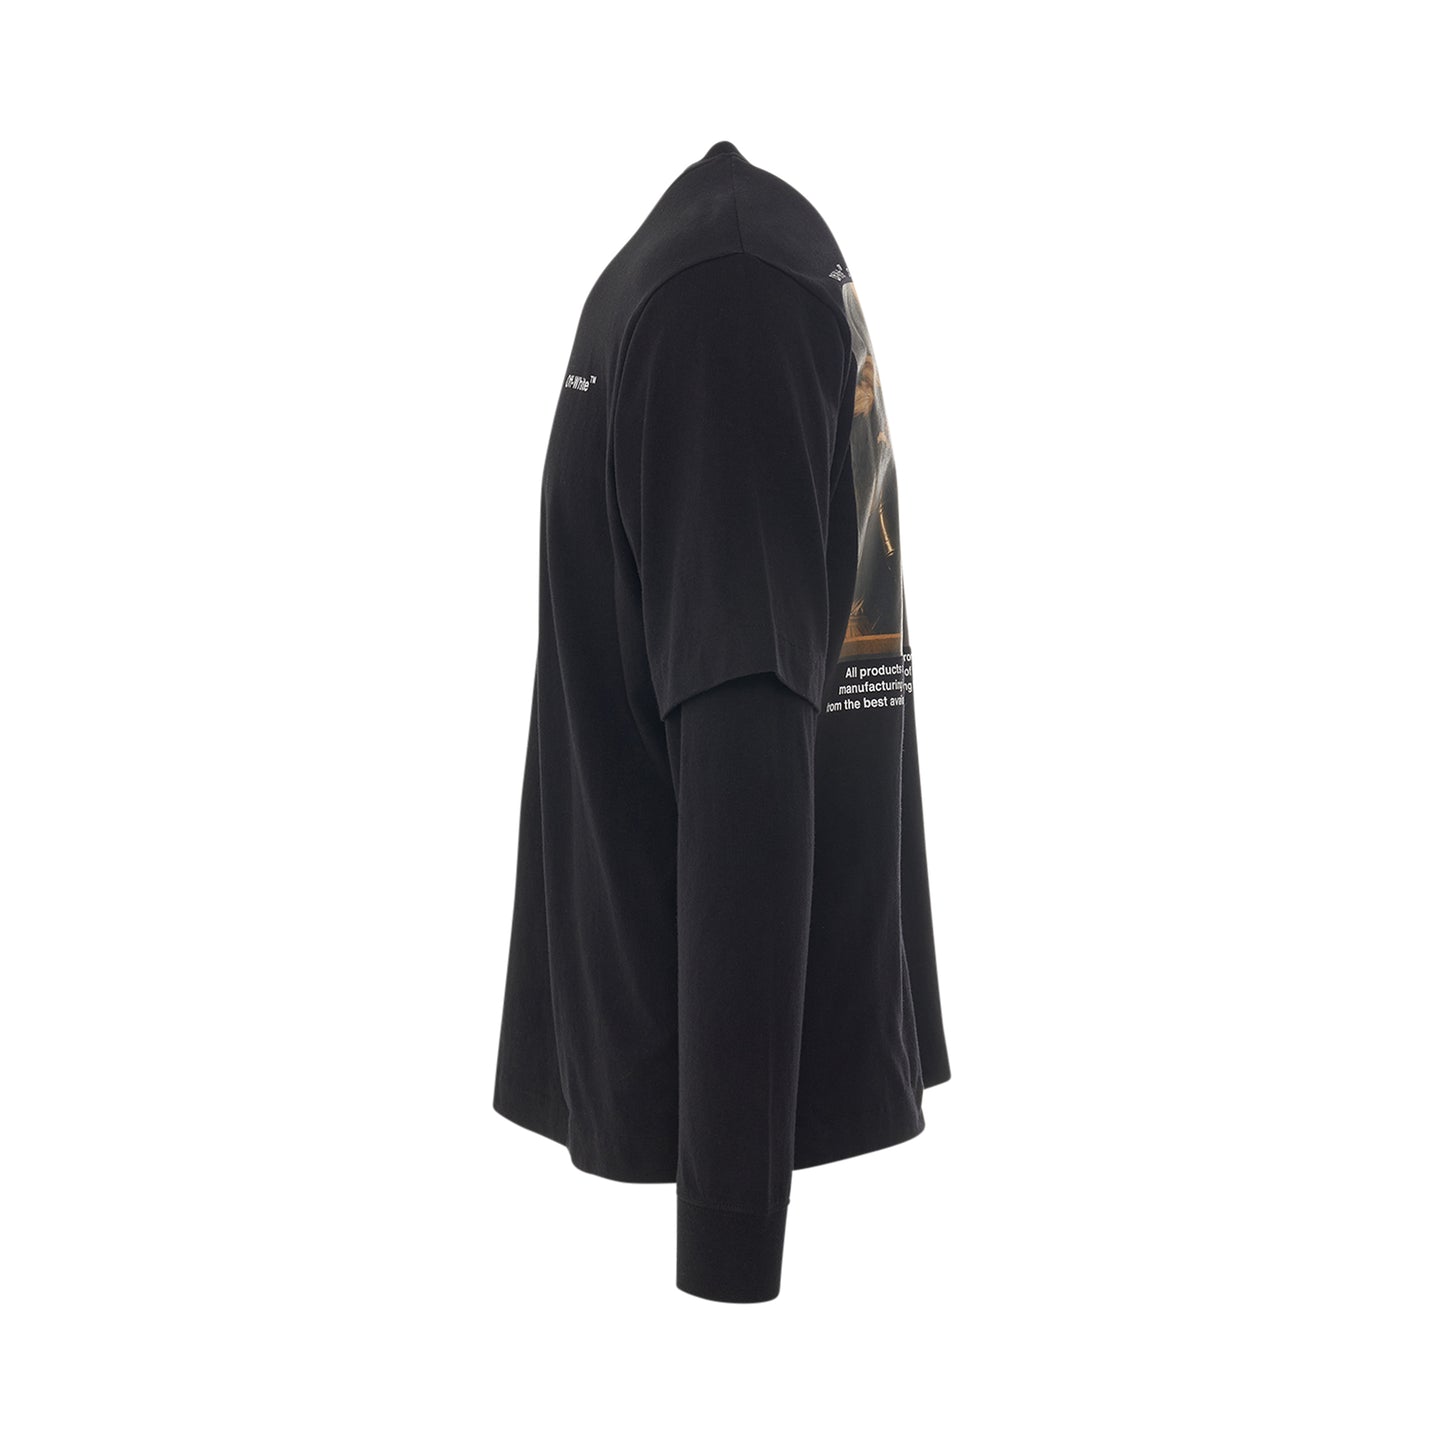 Caravaggio Crowning Double Sleeve T-Shirt in Black